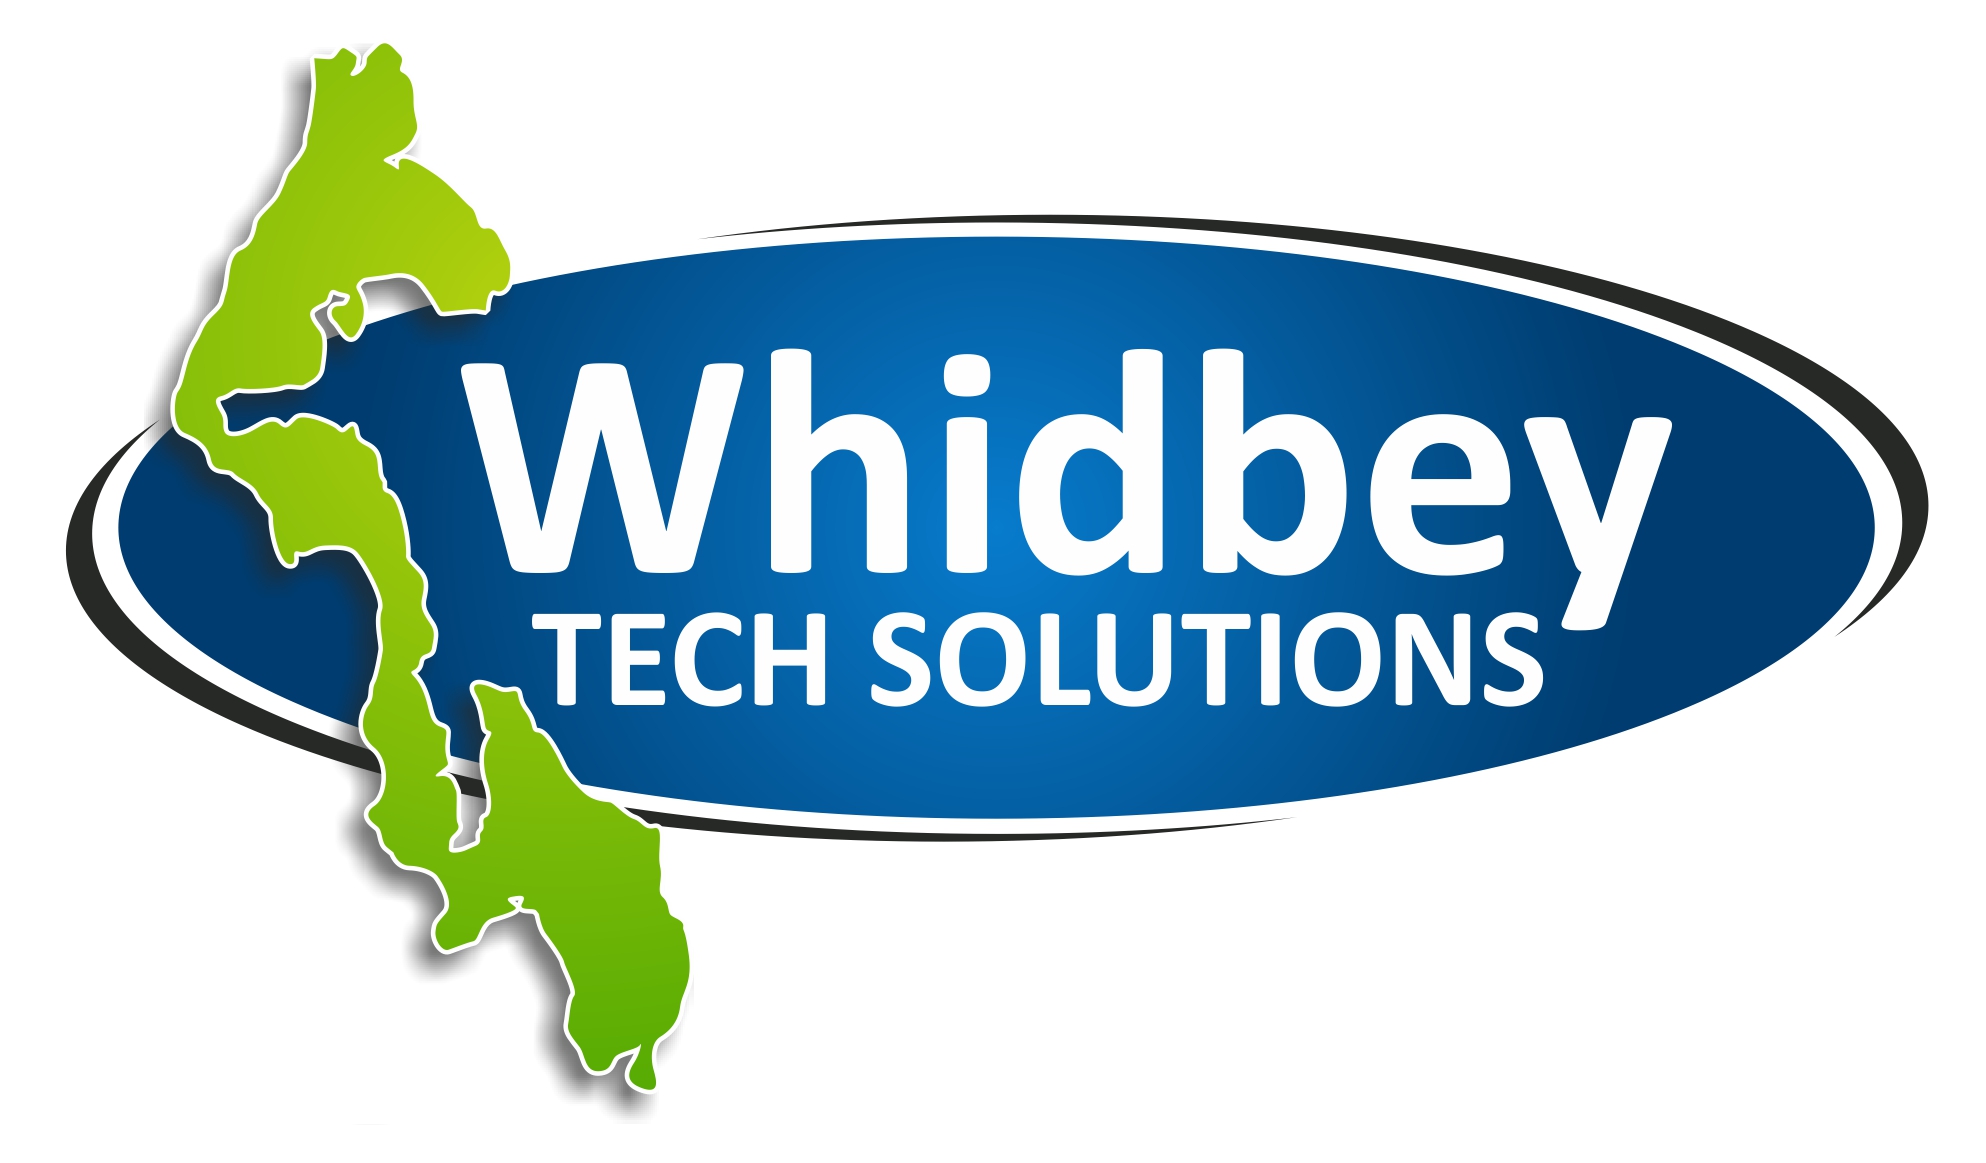 Whidbey Tech Solutions